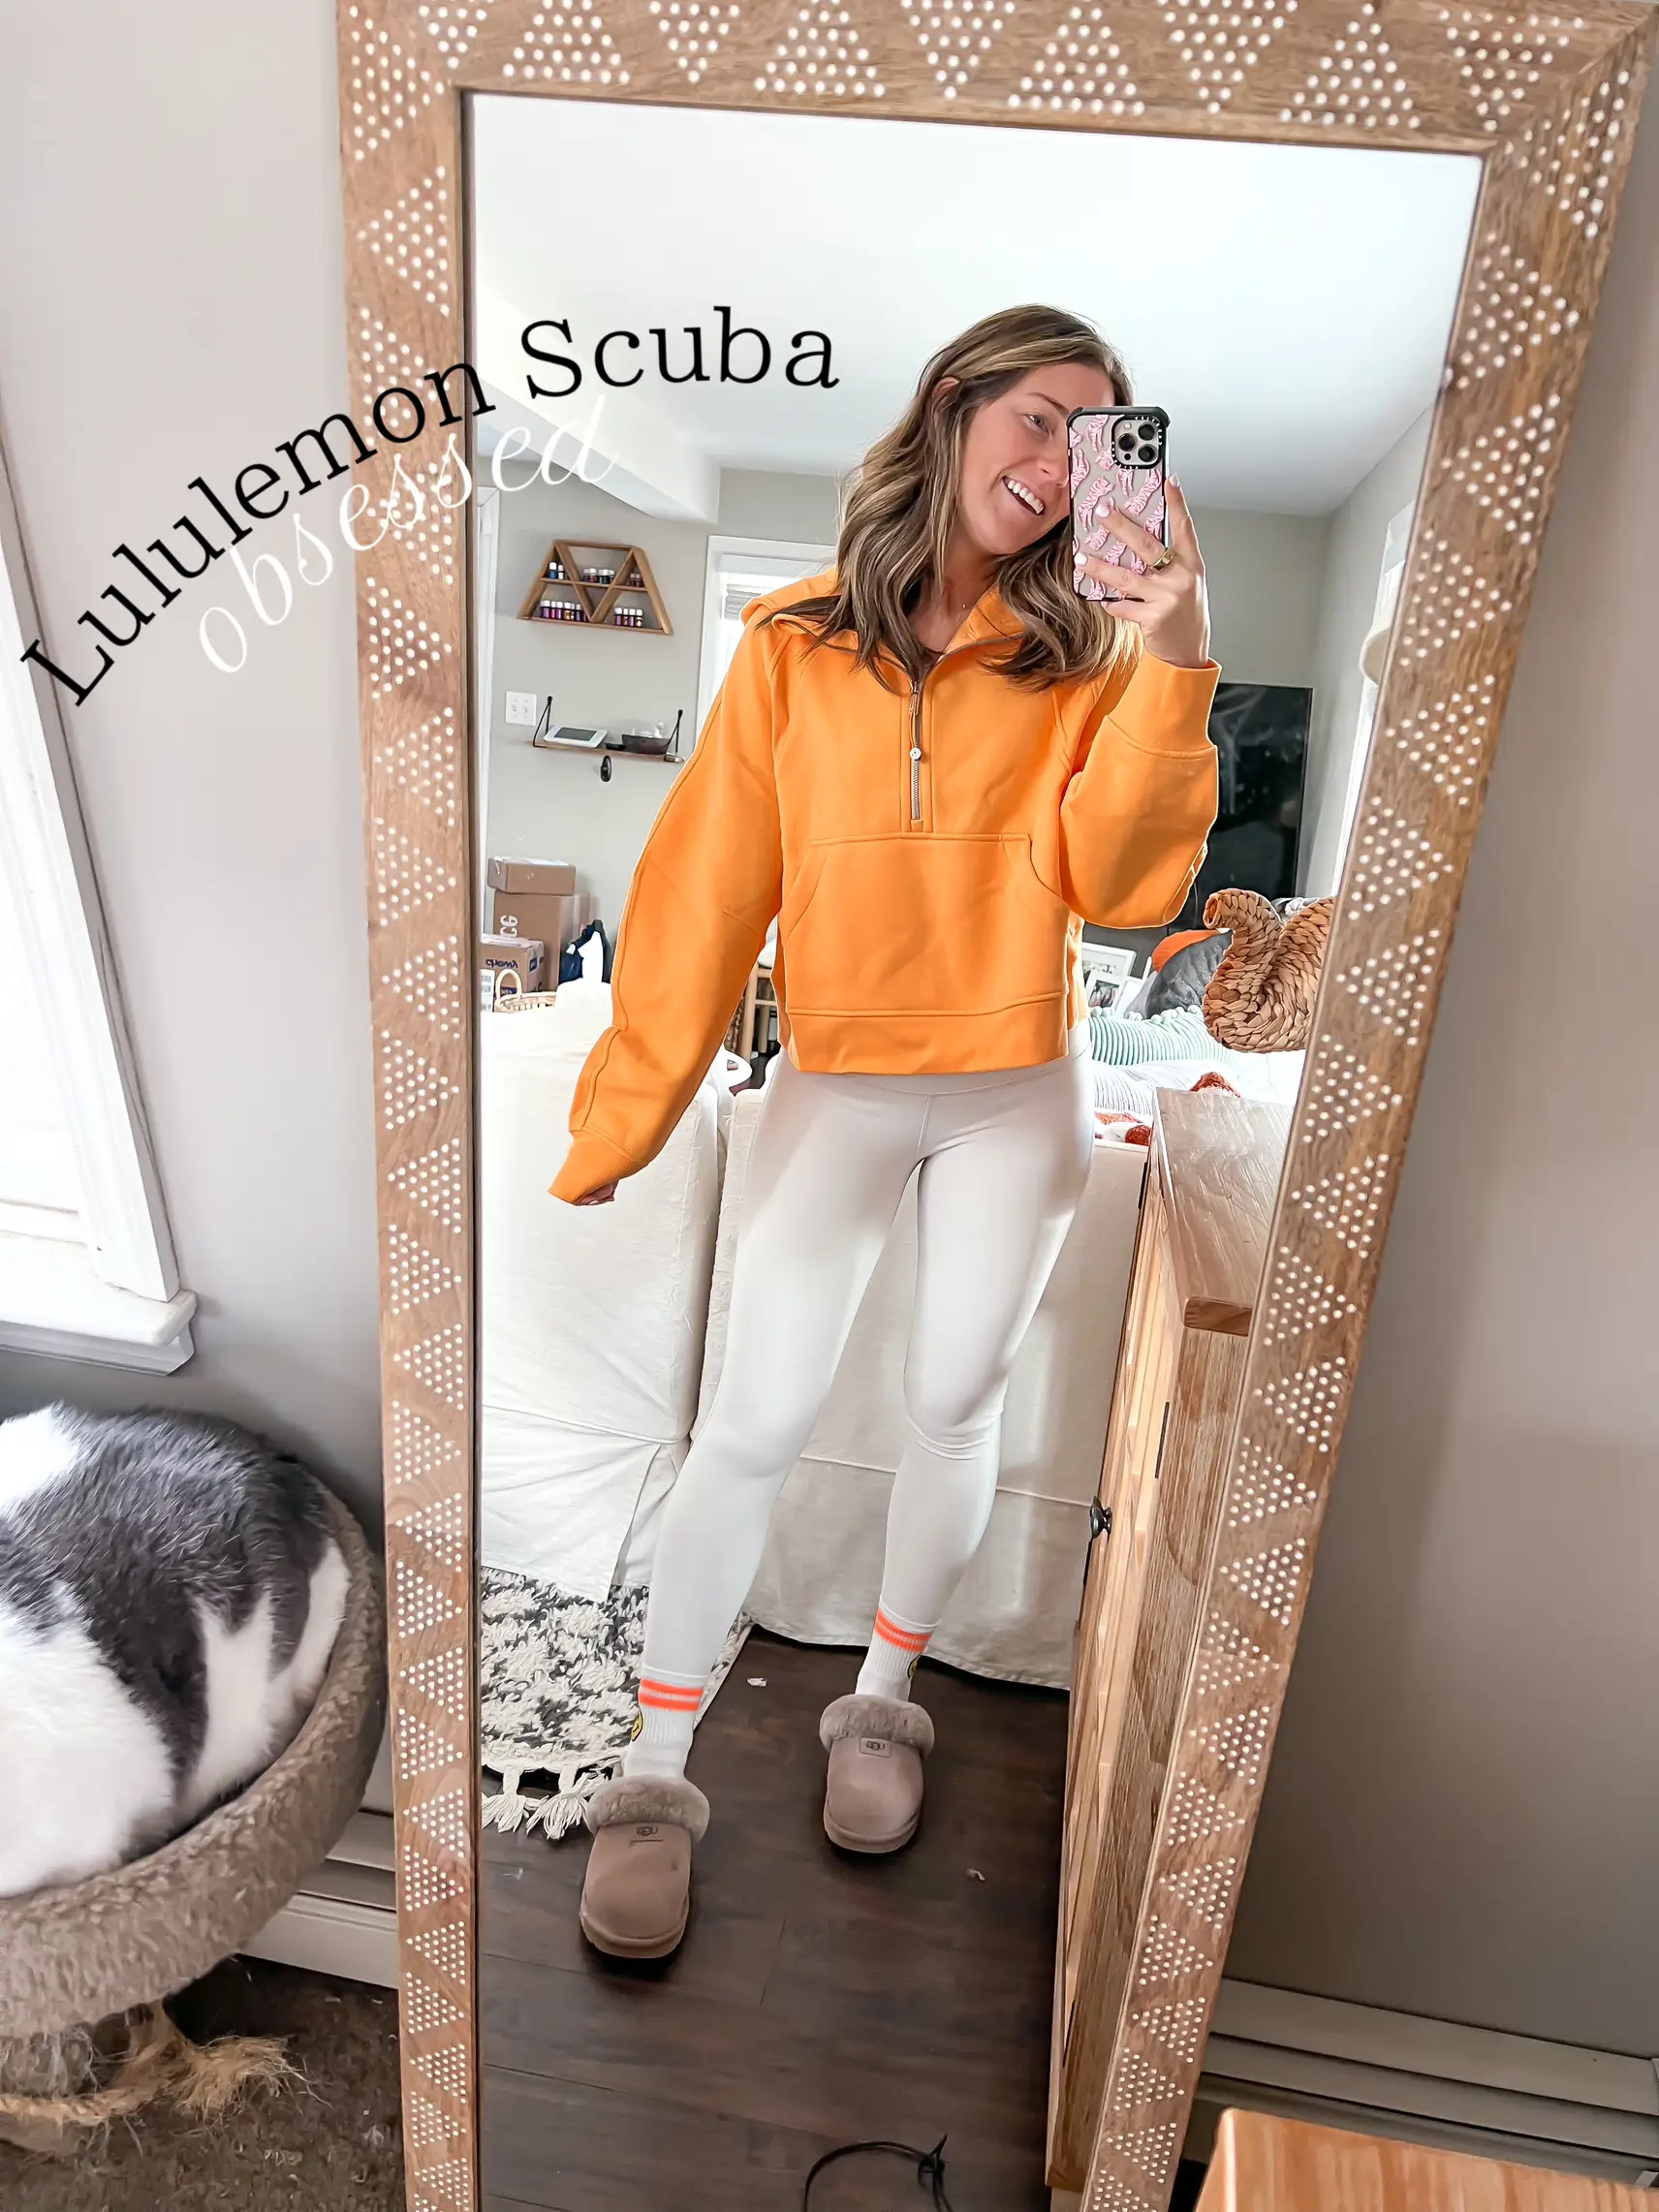 LULULEMON SCUBA OBSESSED 🤩, Gallery posted by Lauren Romano